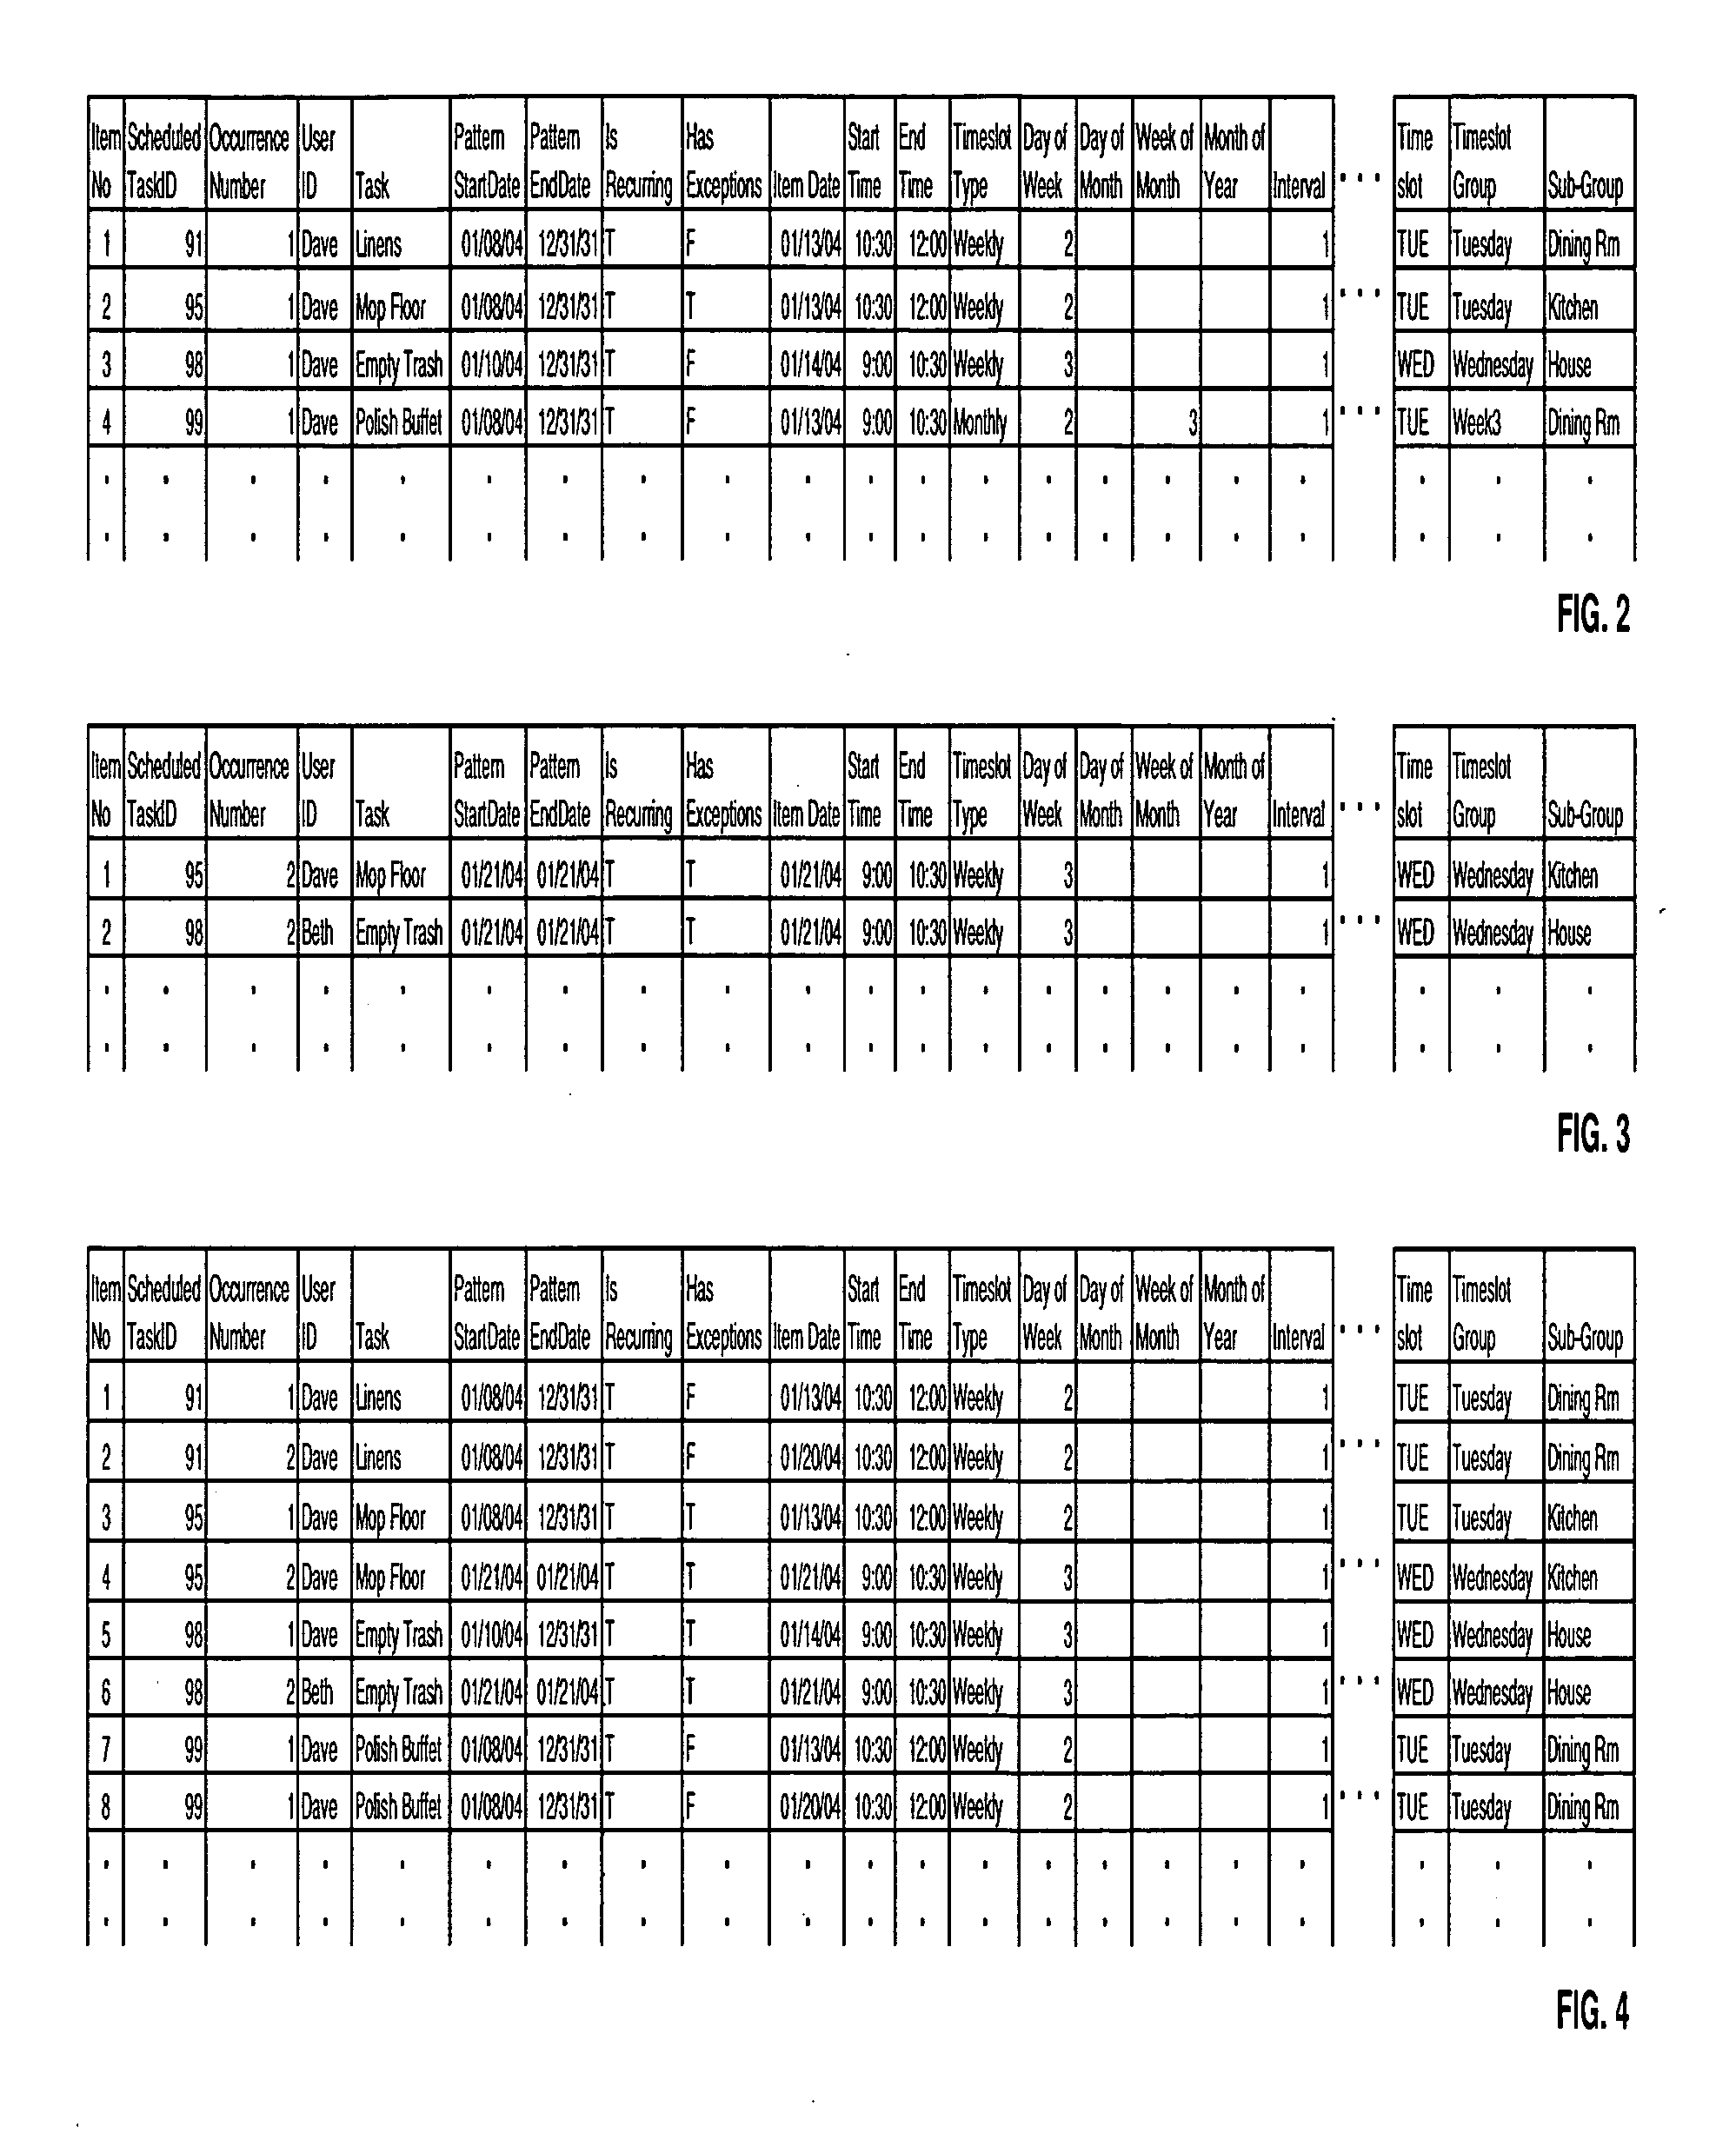 Grouping and displaying multiple tasks within an event object of an electronic calendar